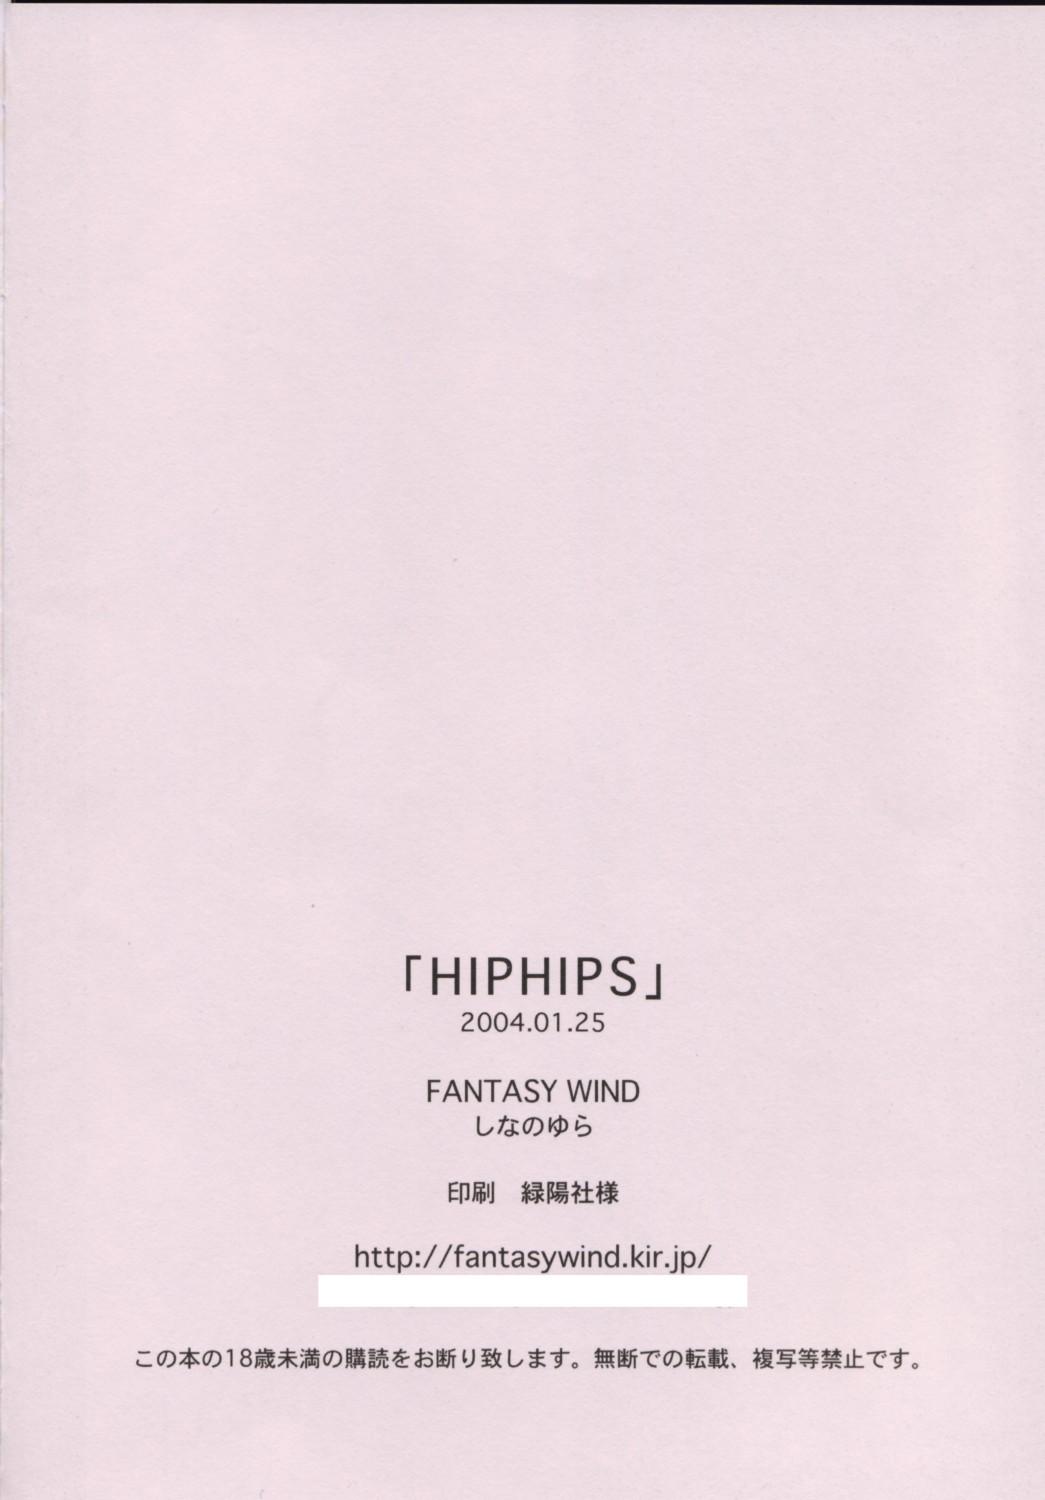 HIPHIPS 16